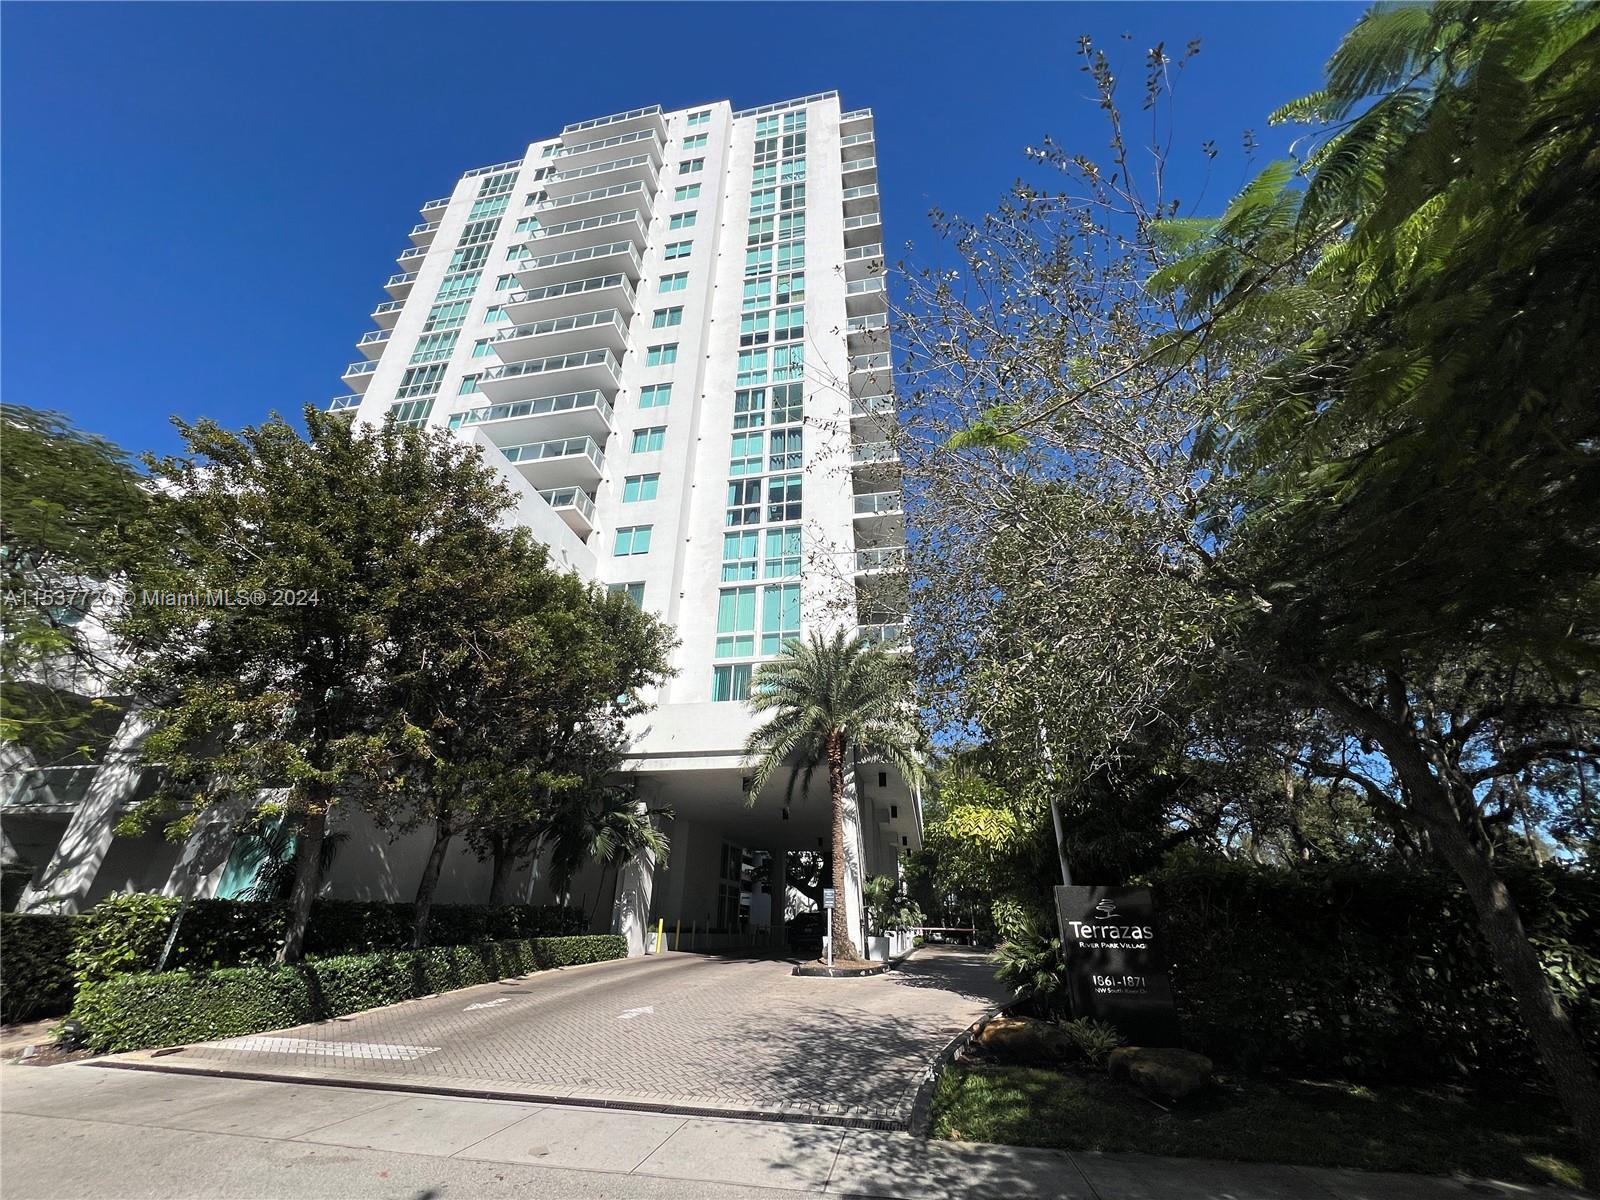 Photo of 1871 NW S River Dr #502 in Miami, FL